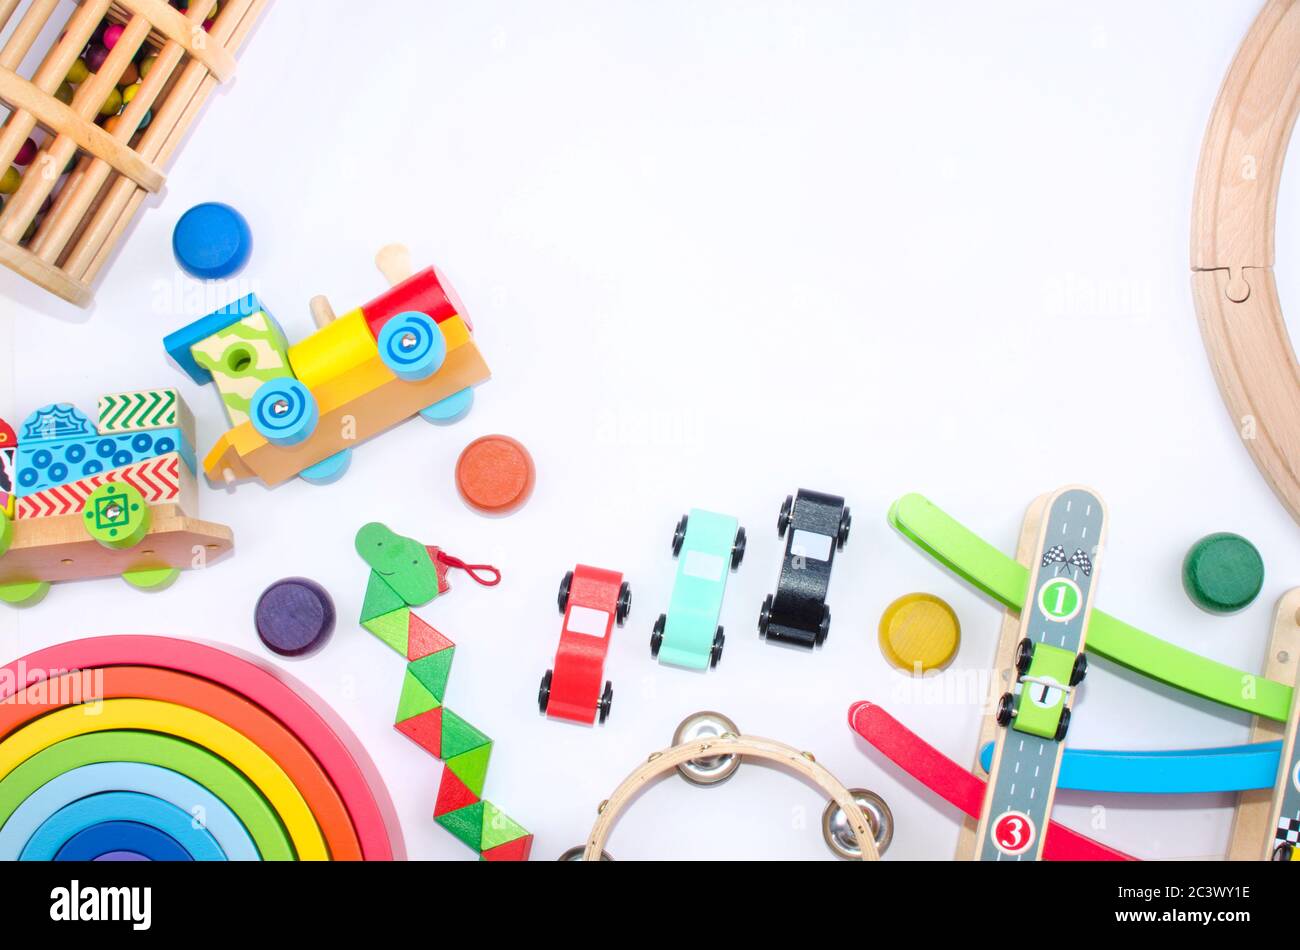 wooden colored toys whit montessori pedagogy and space for text Stock Photo